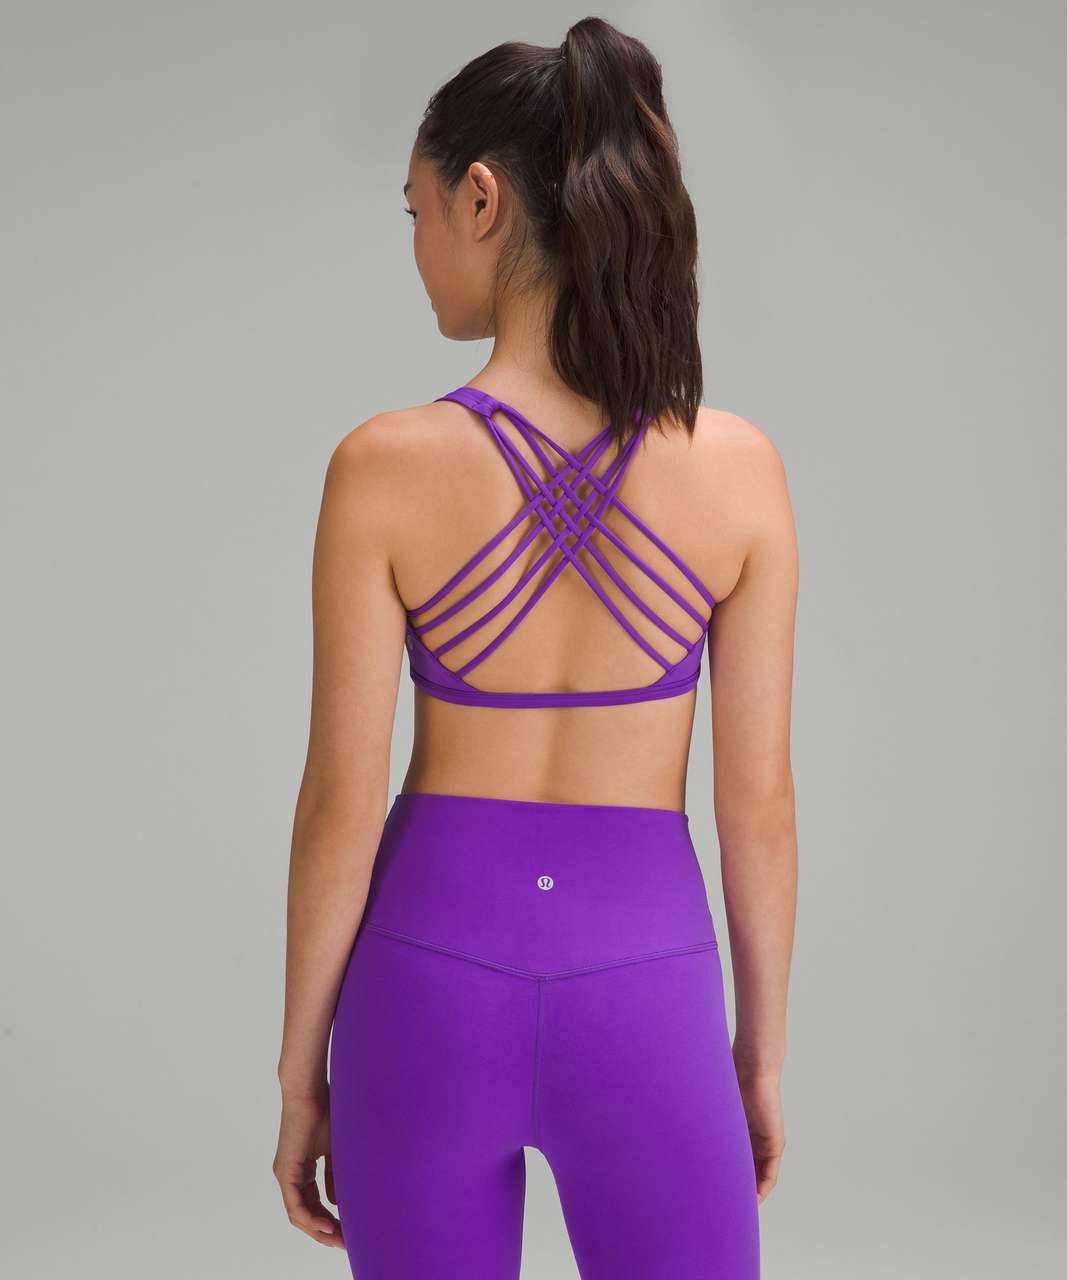 Alo Yoga purple sports bra with cutouts in size small - $18 - From Kami